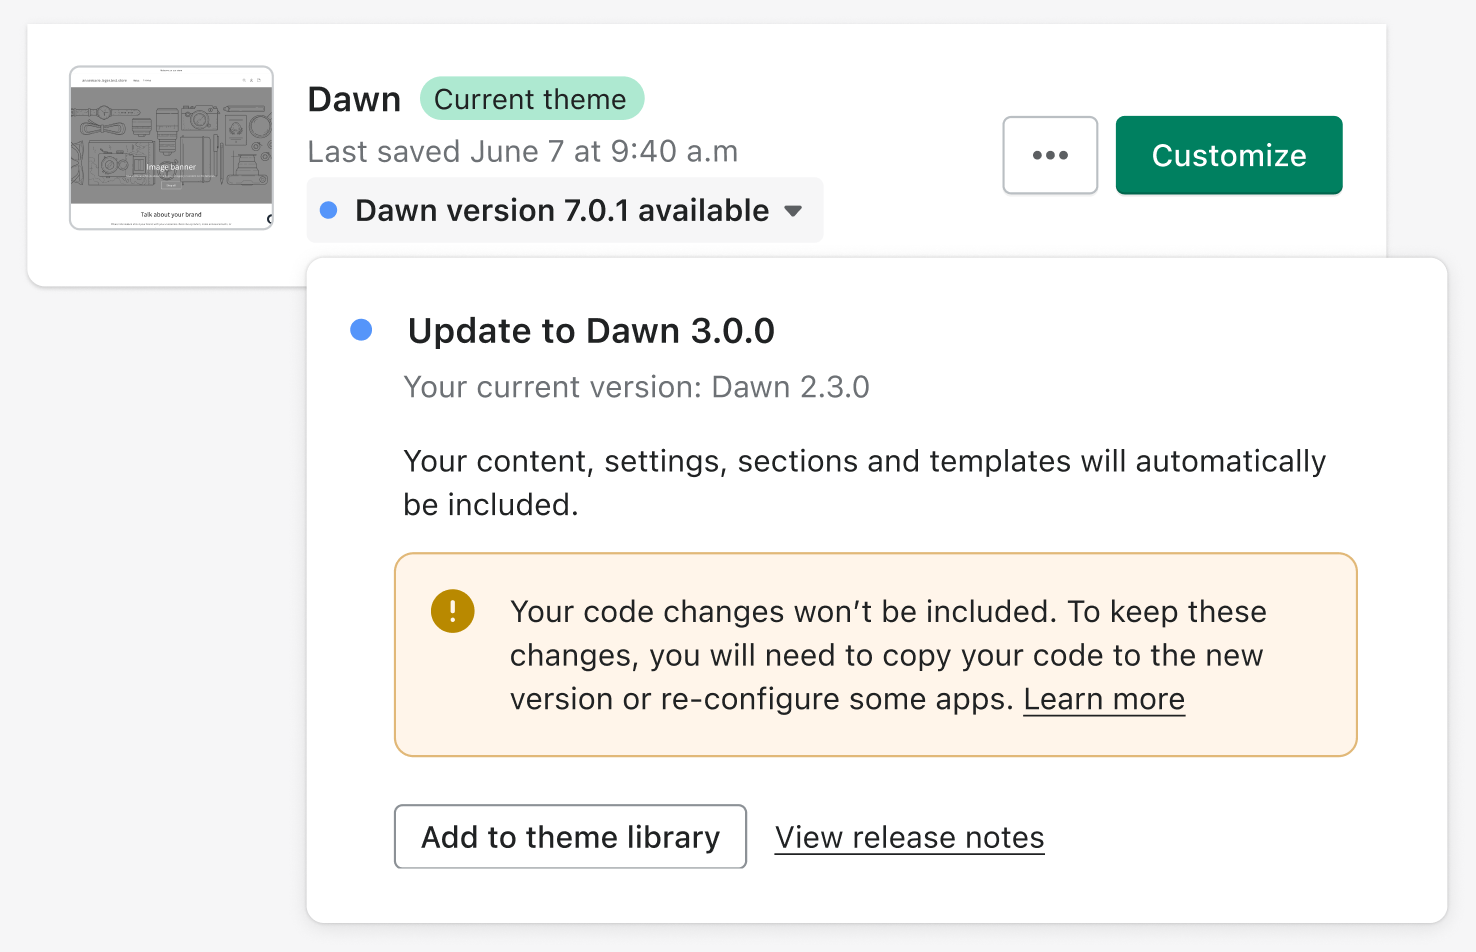 Sample online store with a code changed Dawn theme update available